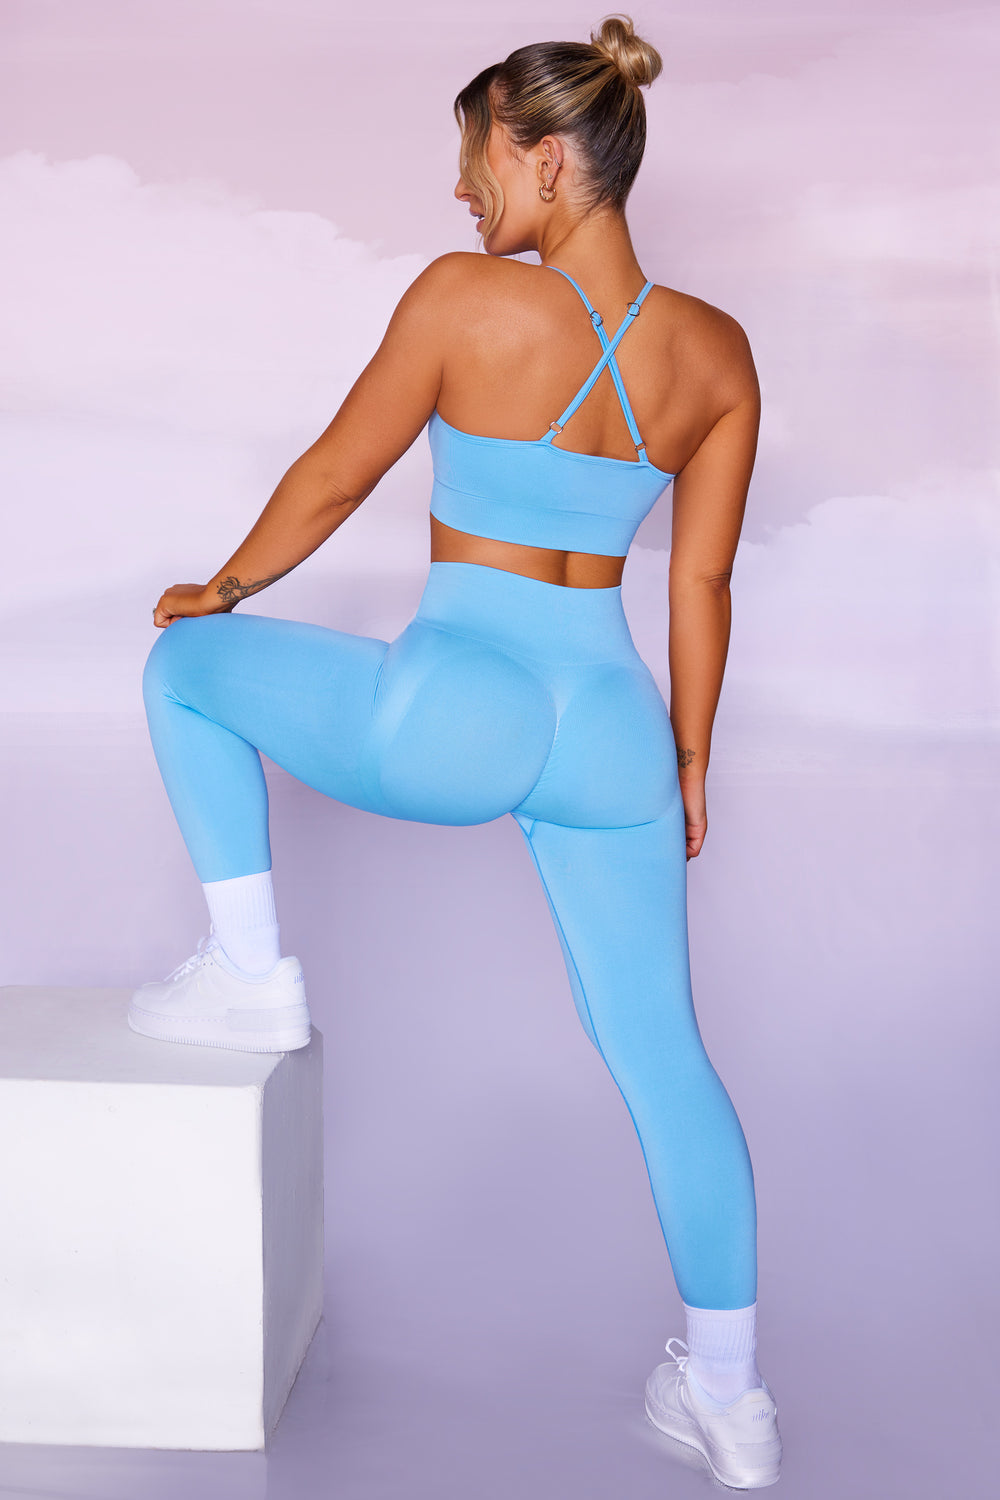 Superset - Curved Waist Seamless Leggings in Blue